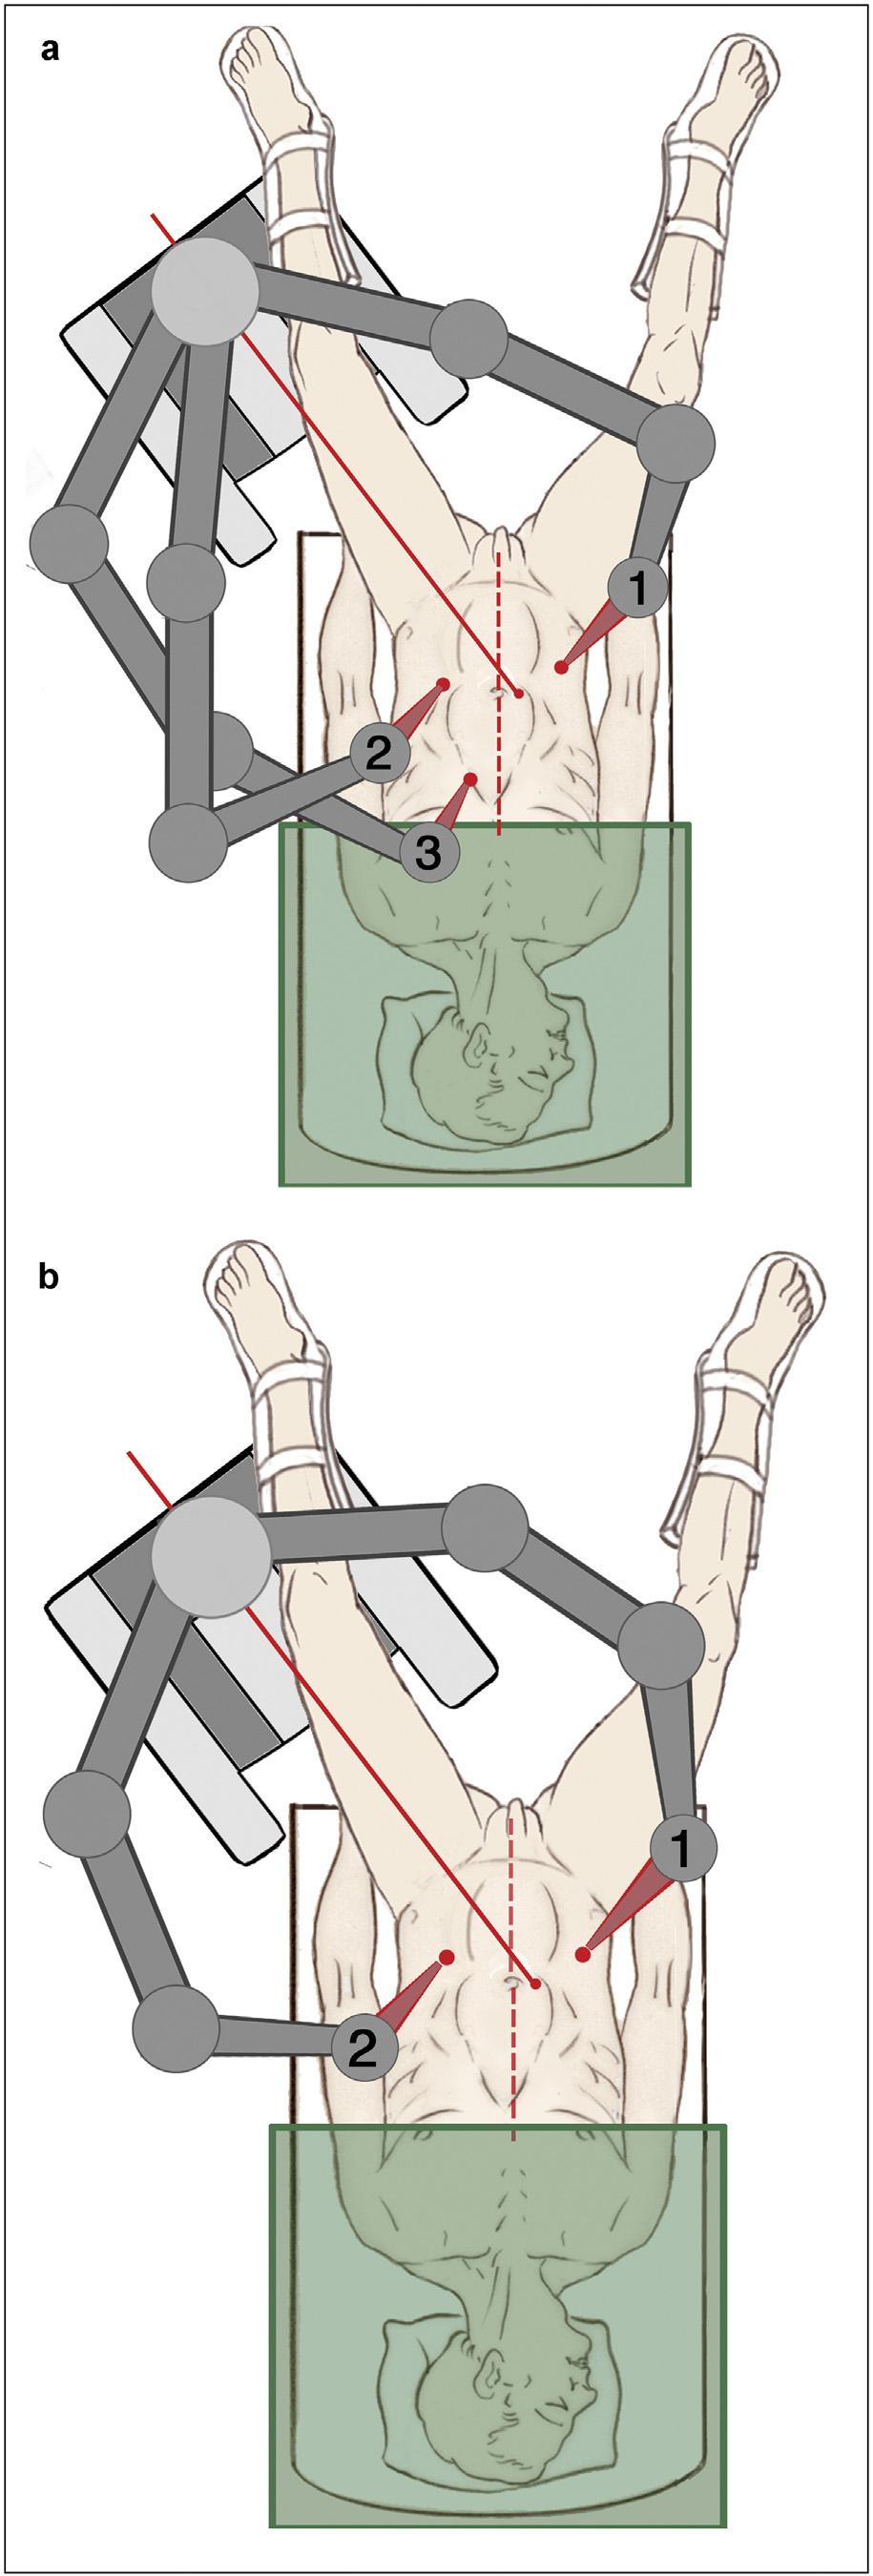 Robot-assisted laparoscopic rectal resection 385 11 Console-directed surgery: the pelvic dissection While the initial robotic set-up may be adequate for complete pelvic dissection in certain